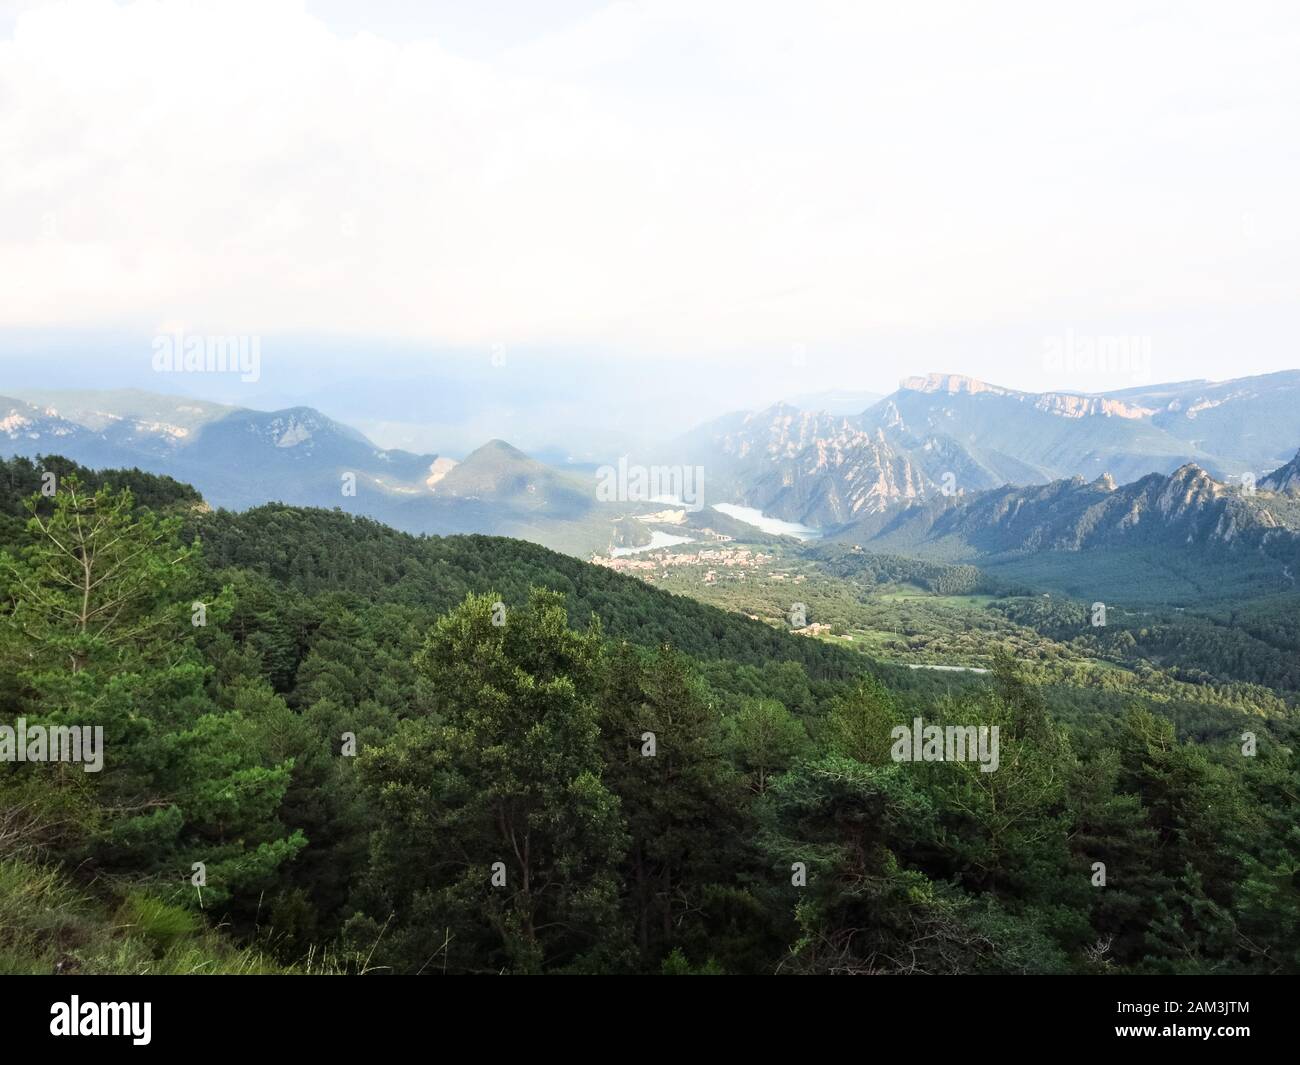 Panoramic view of the pre-Pyrenean area of Catalonia, with the Sierra Cadi, Llosa del Cavall pond and the small town of San Lorenzo de Morunys. Catalo Stock Photo